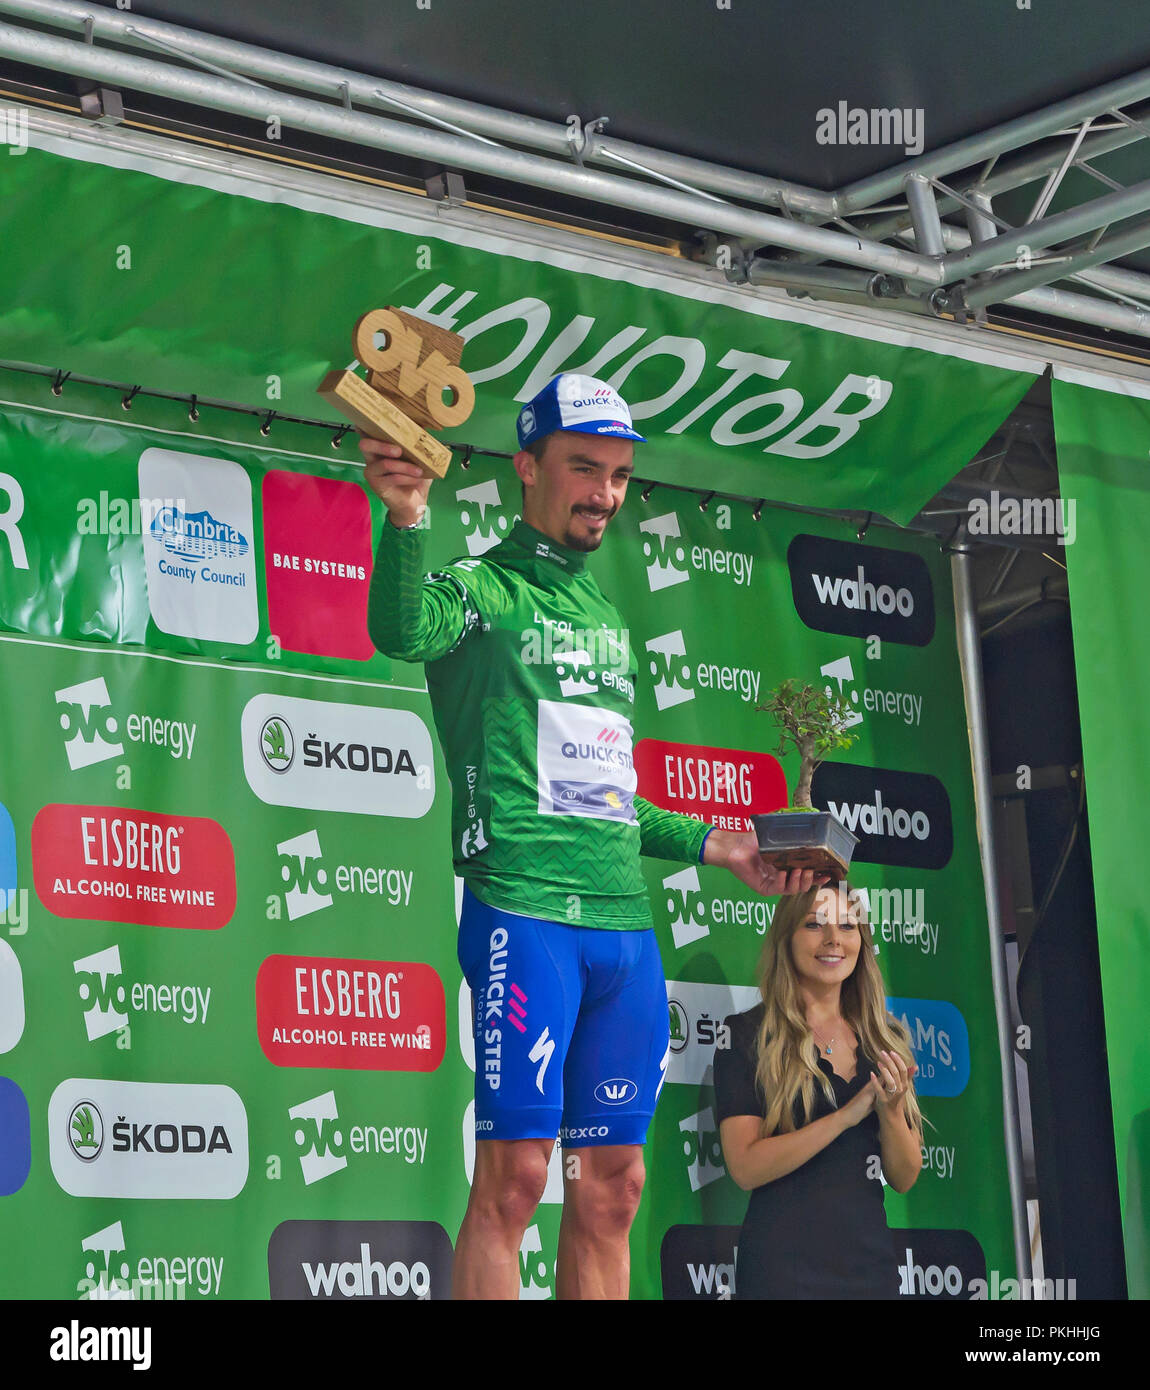 Tour of Britain Stage 6. Julian Alaphilippe (Quick Step Floors) becomes race leader and wears the green jersey on the podium at Whinlatter 7-9-18. Stock Photo